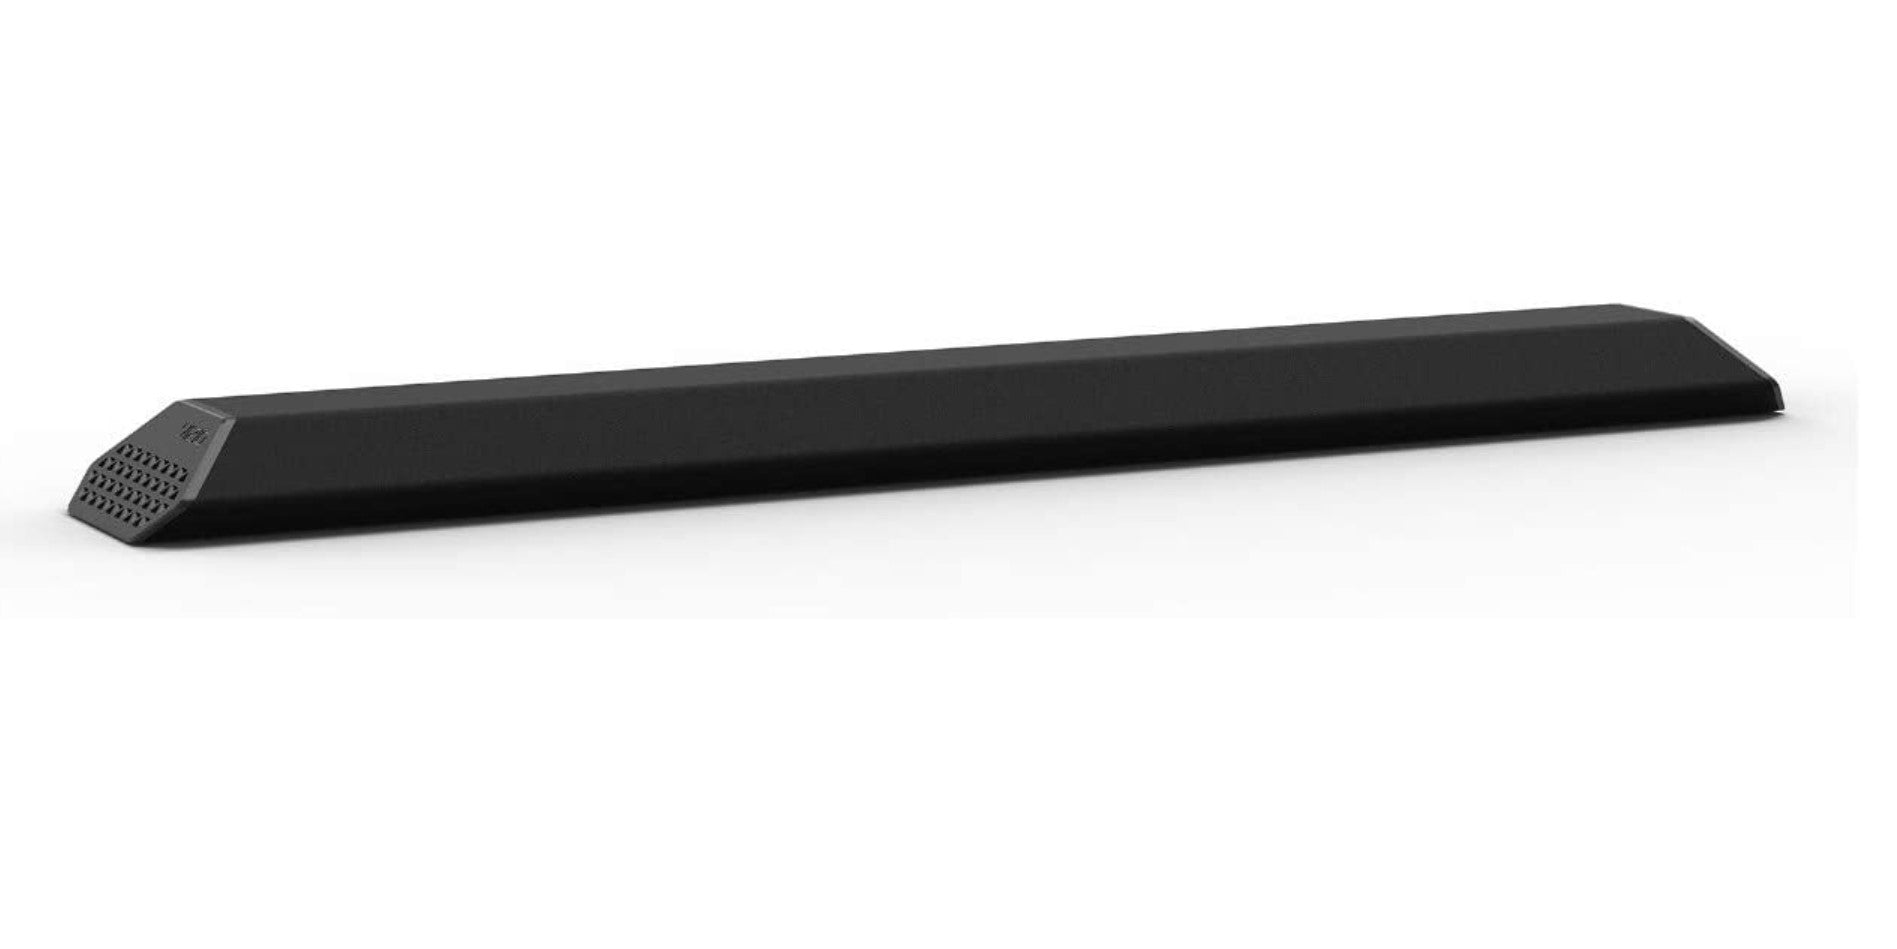 Vizio SB362An-F46B-RB 36" 2.1 Sound Bar Built-in Subwoofers - Certified Refurbished